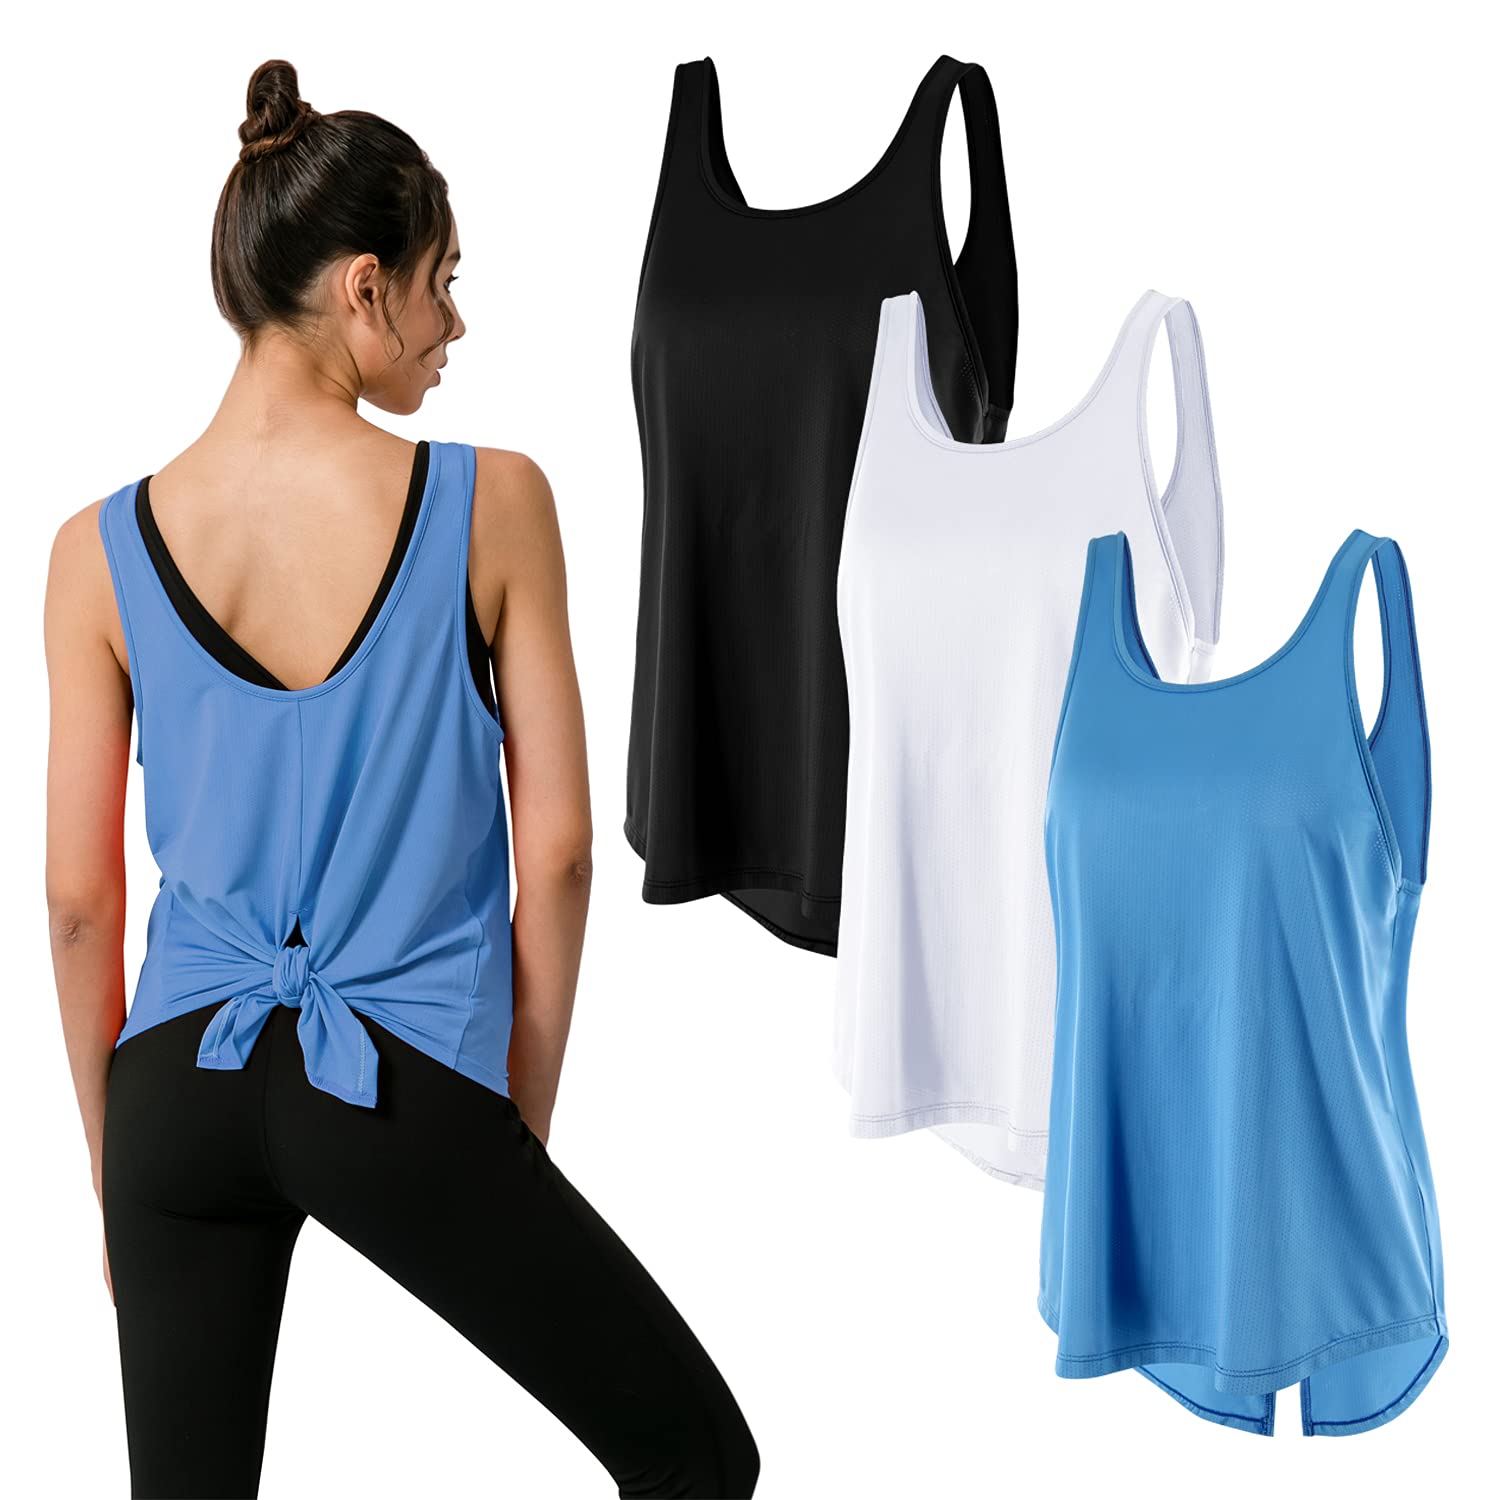 Best Deal for Women's 3 Pack Workout Shirts Athletic Yoga Tops Dry Fit